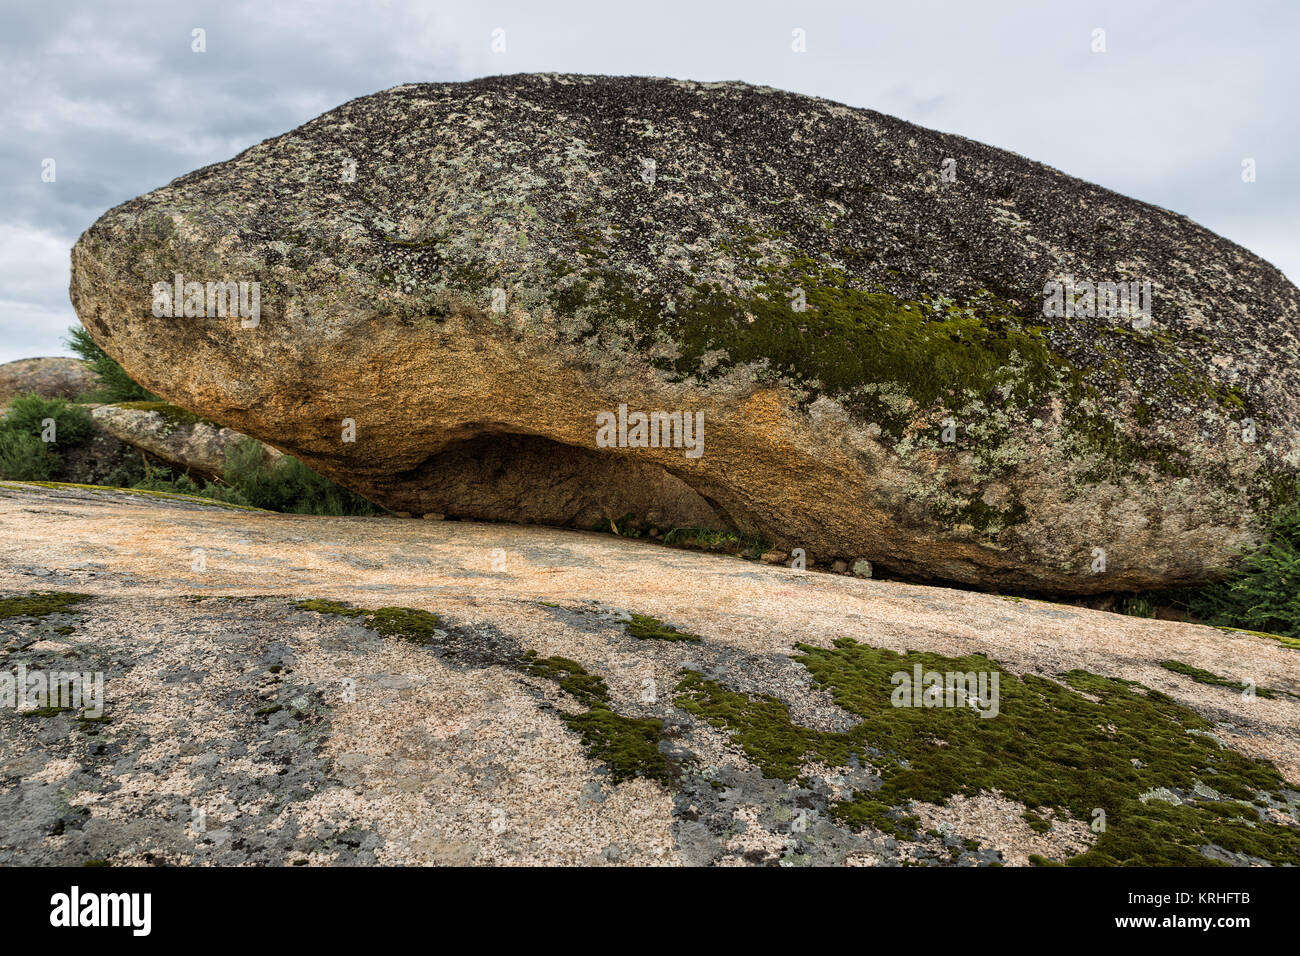 Landscape with the entrance to a small cave in the natural area of the Barruecos. Spain. Stock Photo